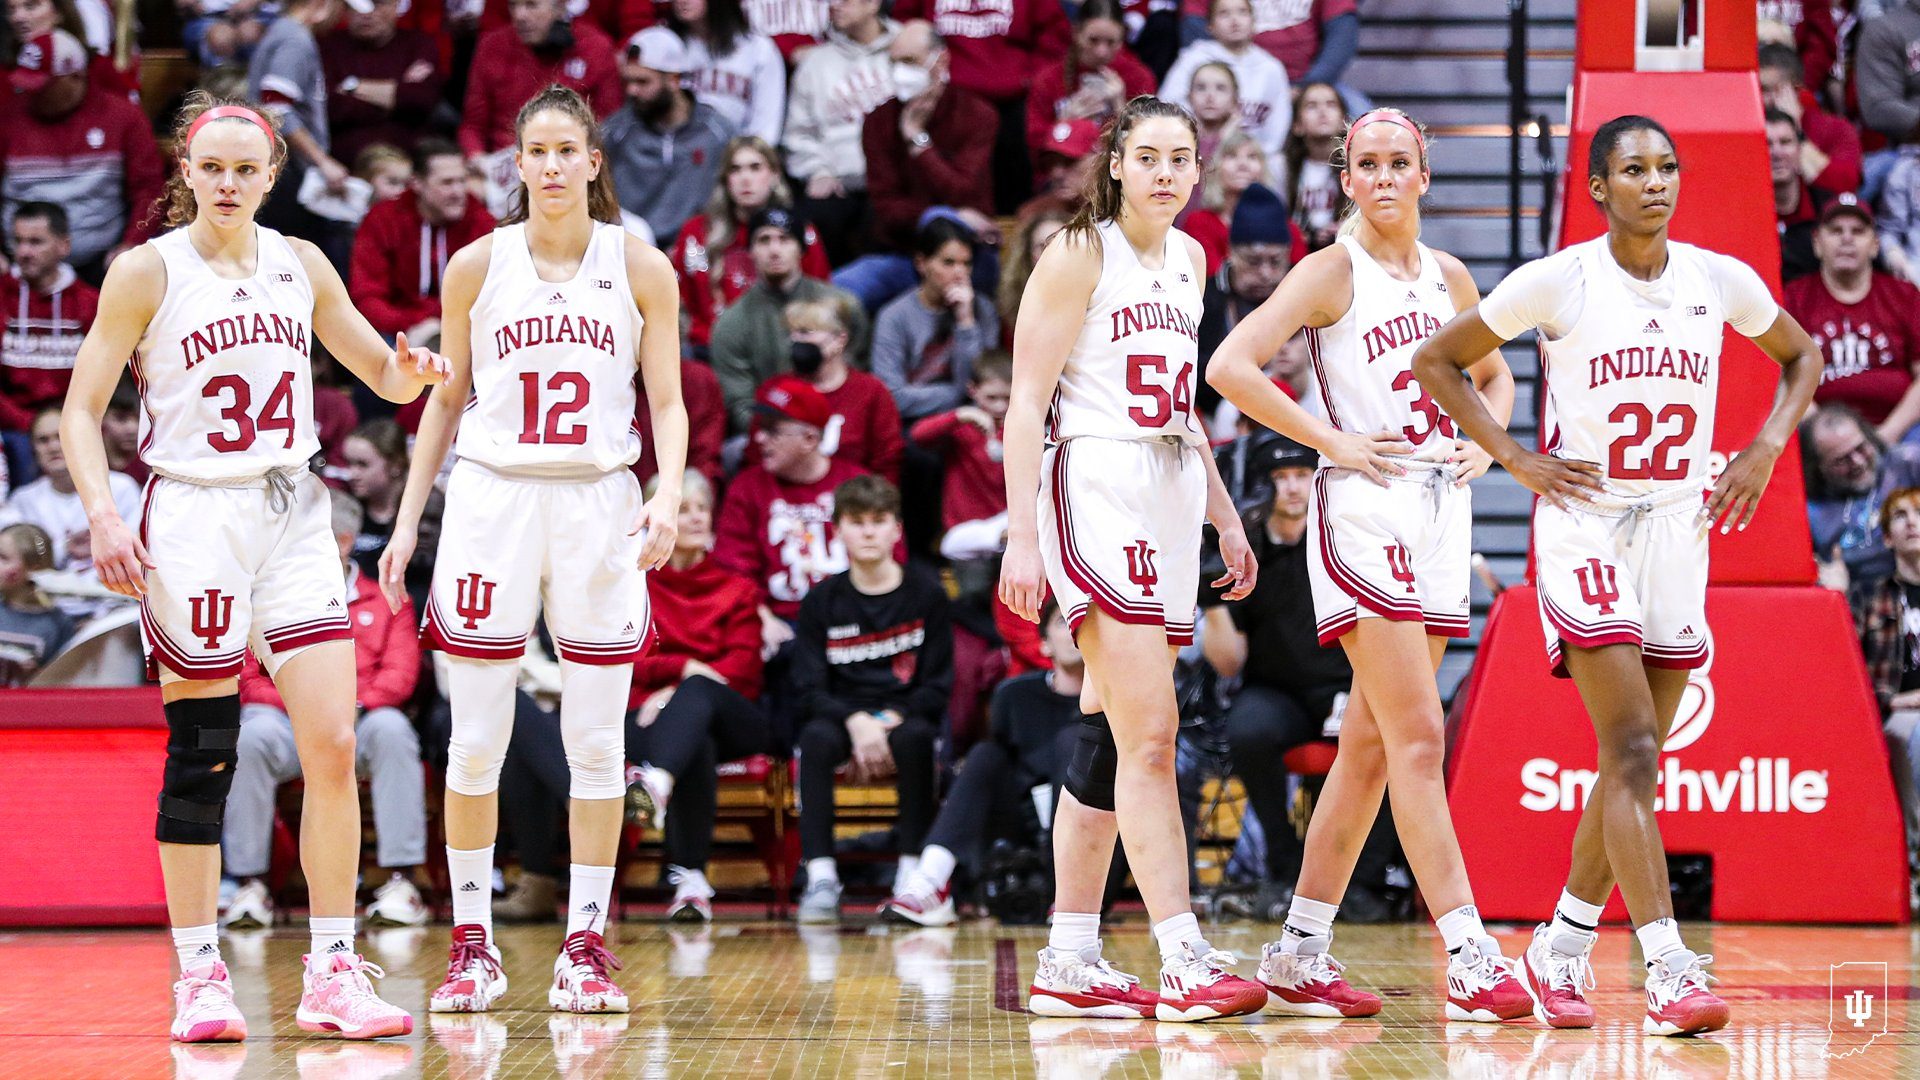 Maintaining focus will be key for IU women’s basketball heading into